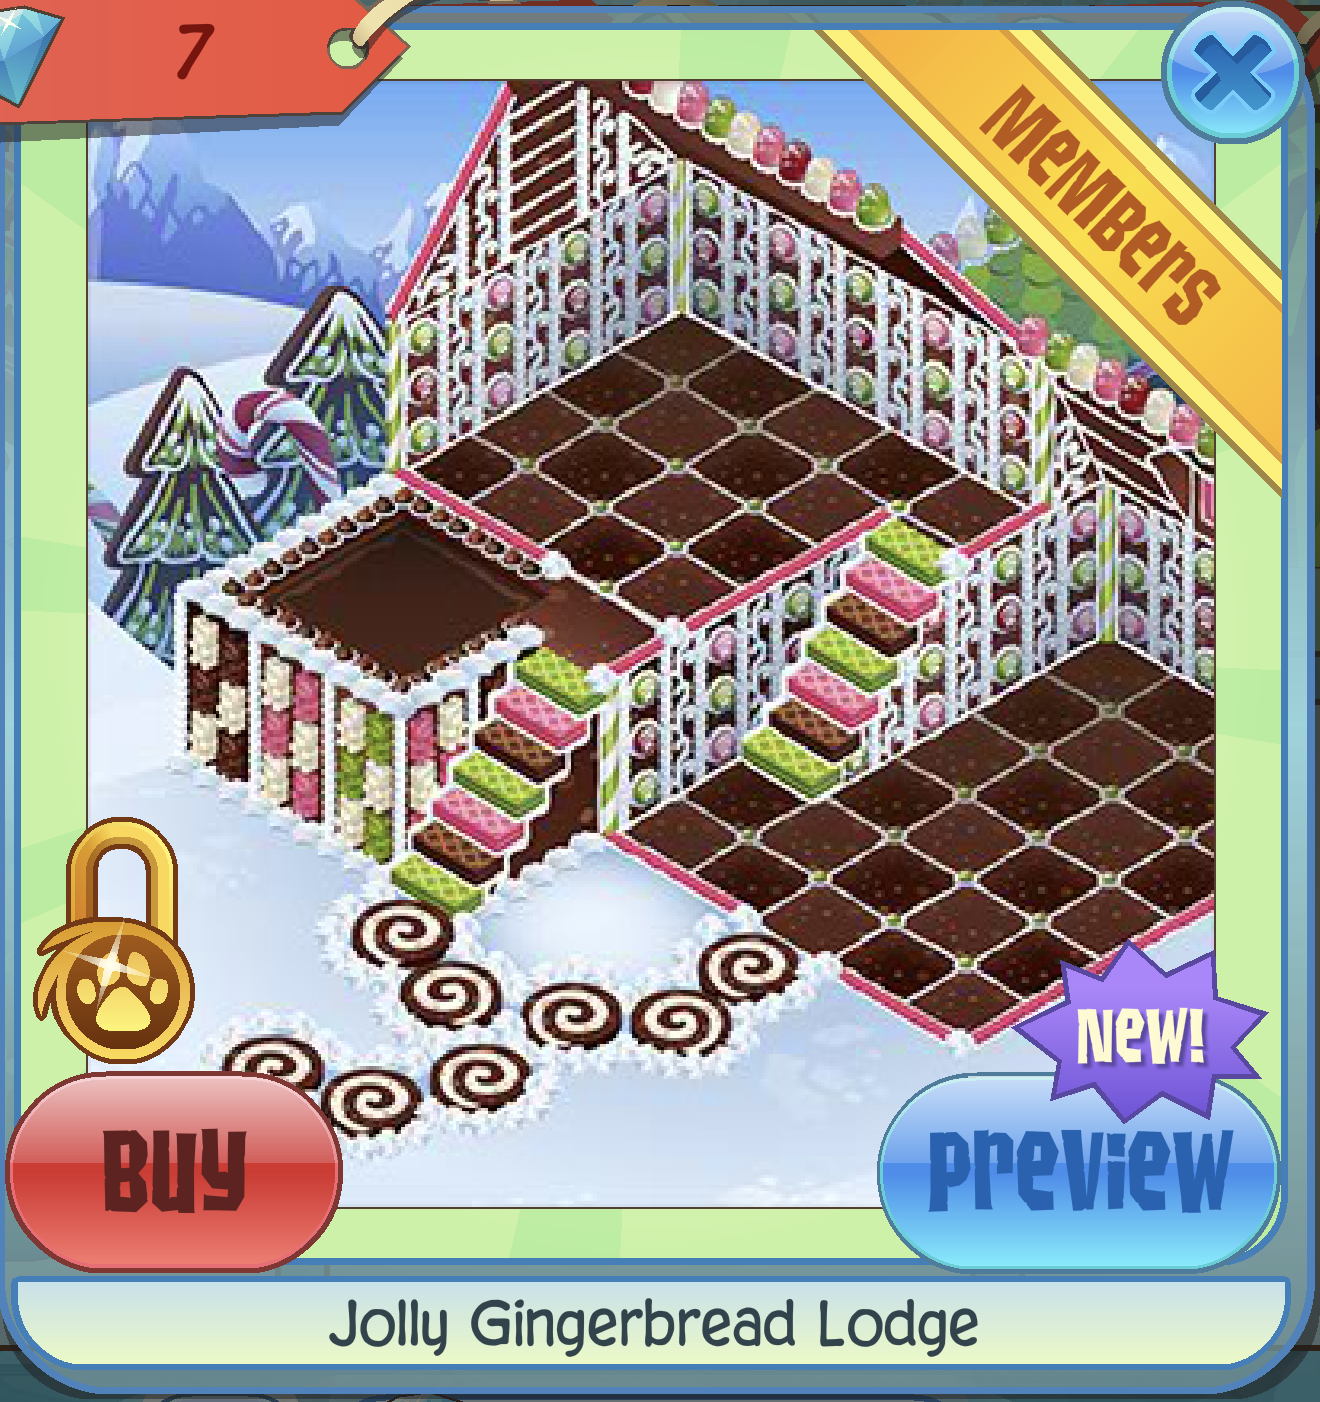 https://static.wikia.nocookie.net/animaljam/images/e/e6/Jolly_gingerbread_lodge.png/revision/latest?cb=20221202052508